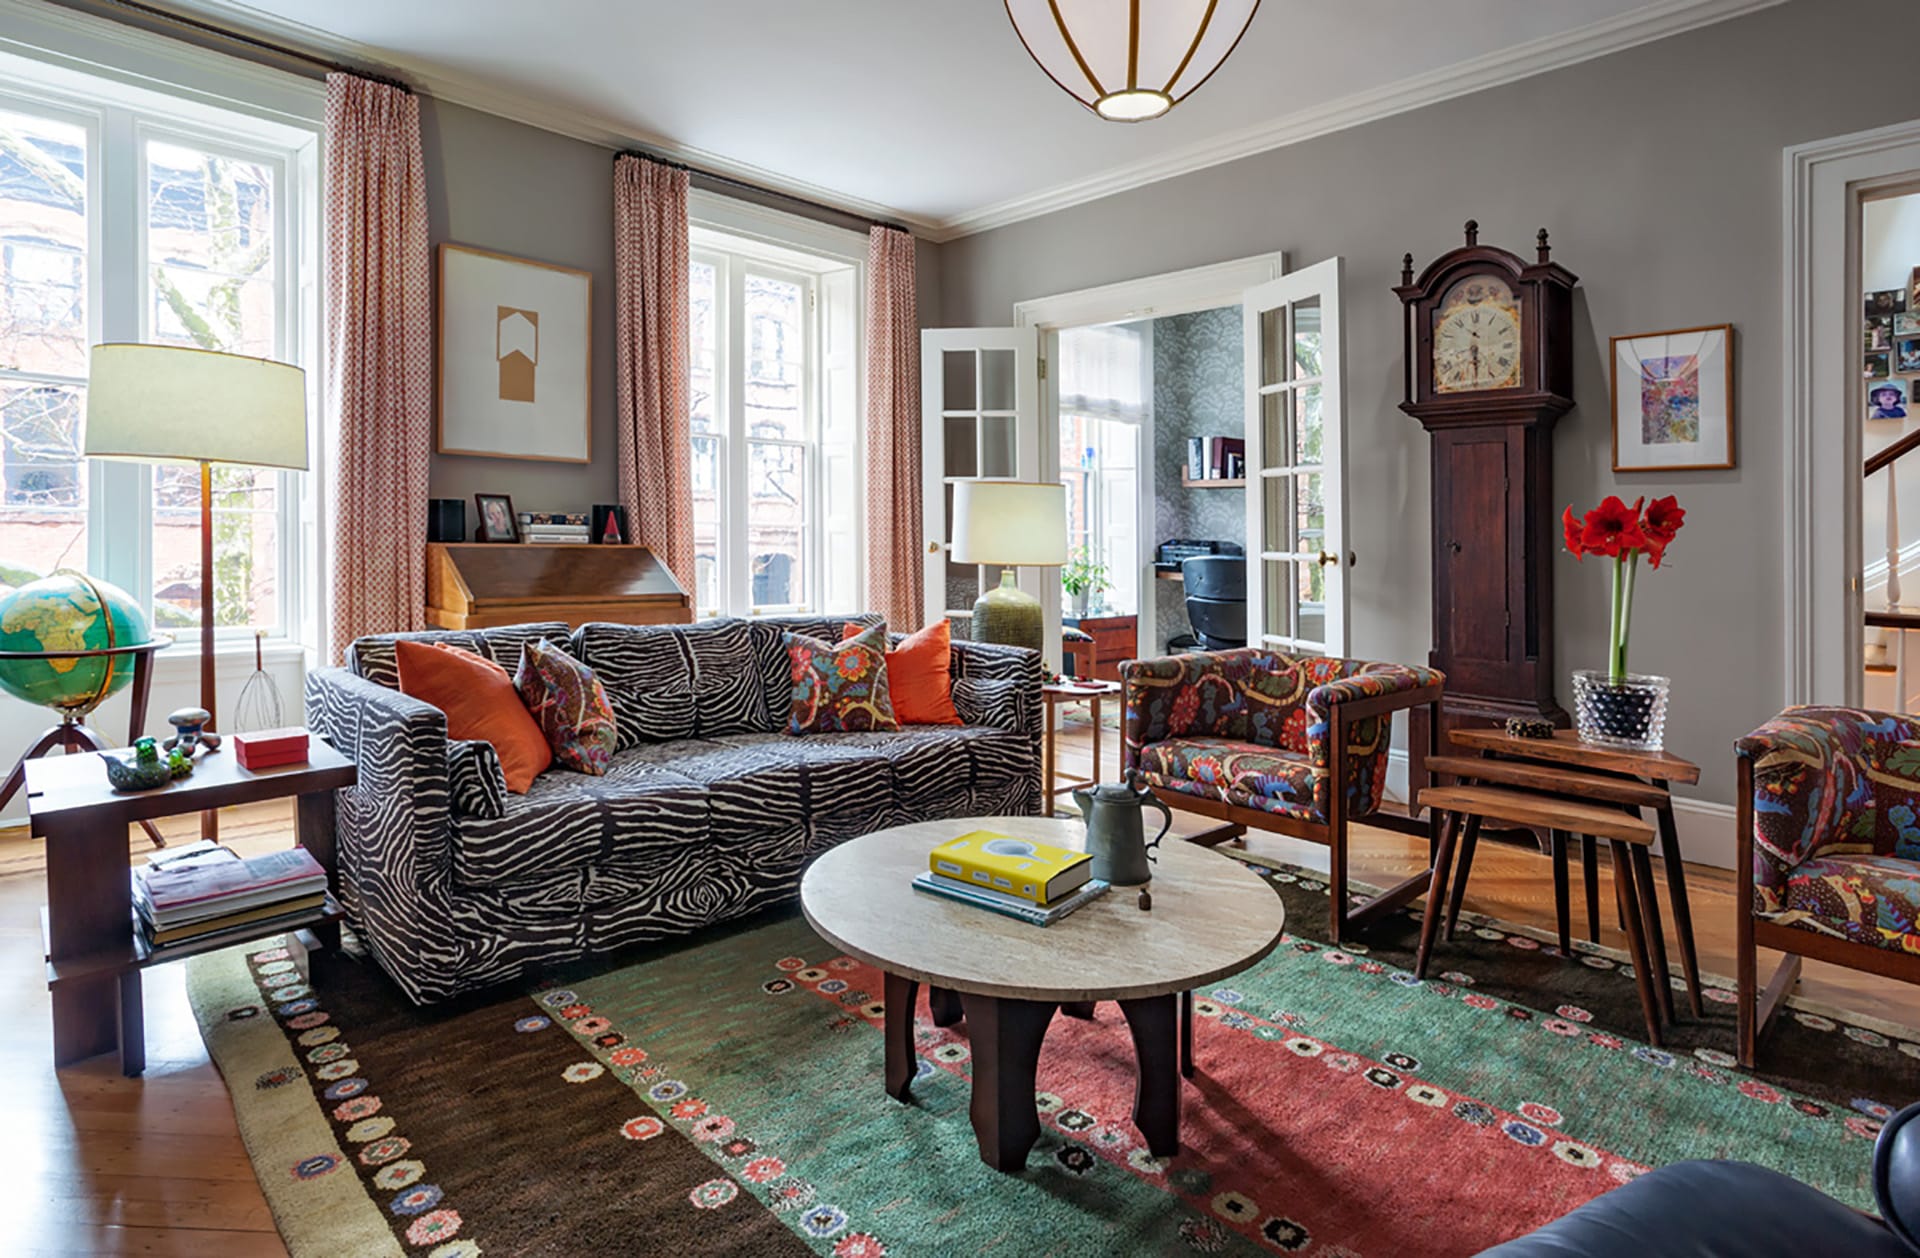 Bright, eclectic living room with patterned couches and chairs, a large patterned rug, light grey walls, and a Grandfather clock.